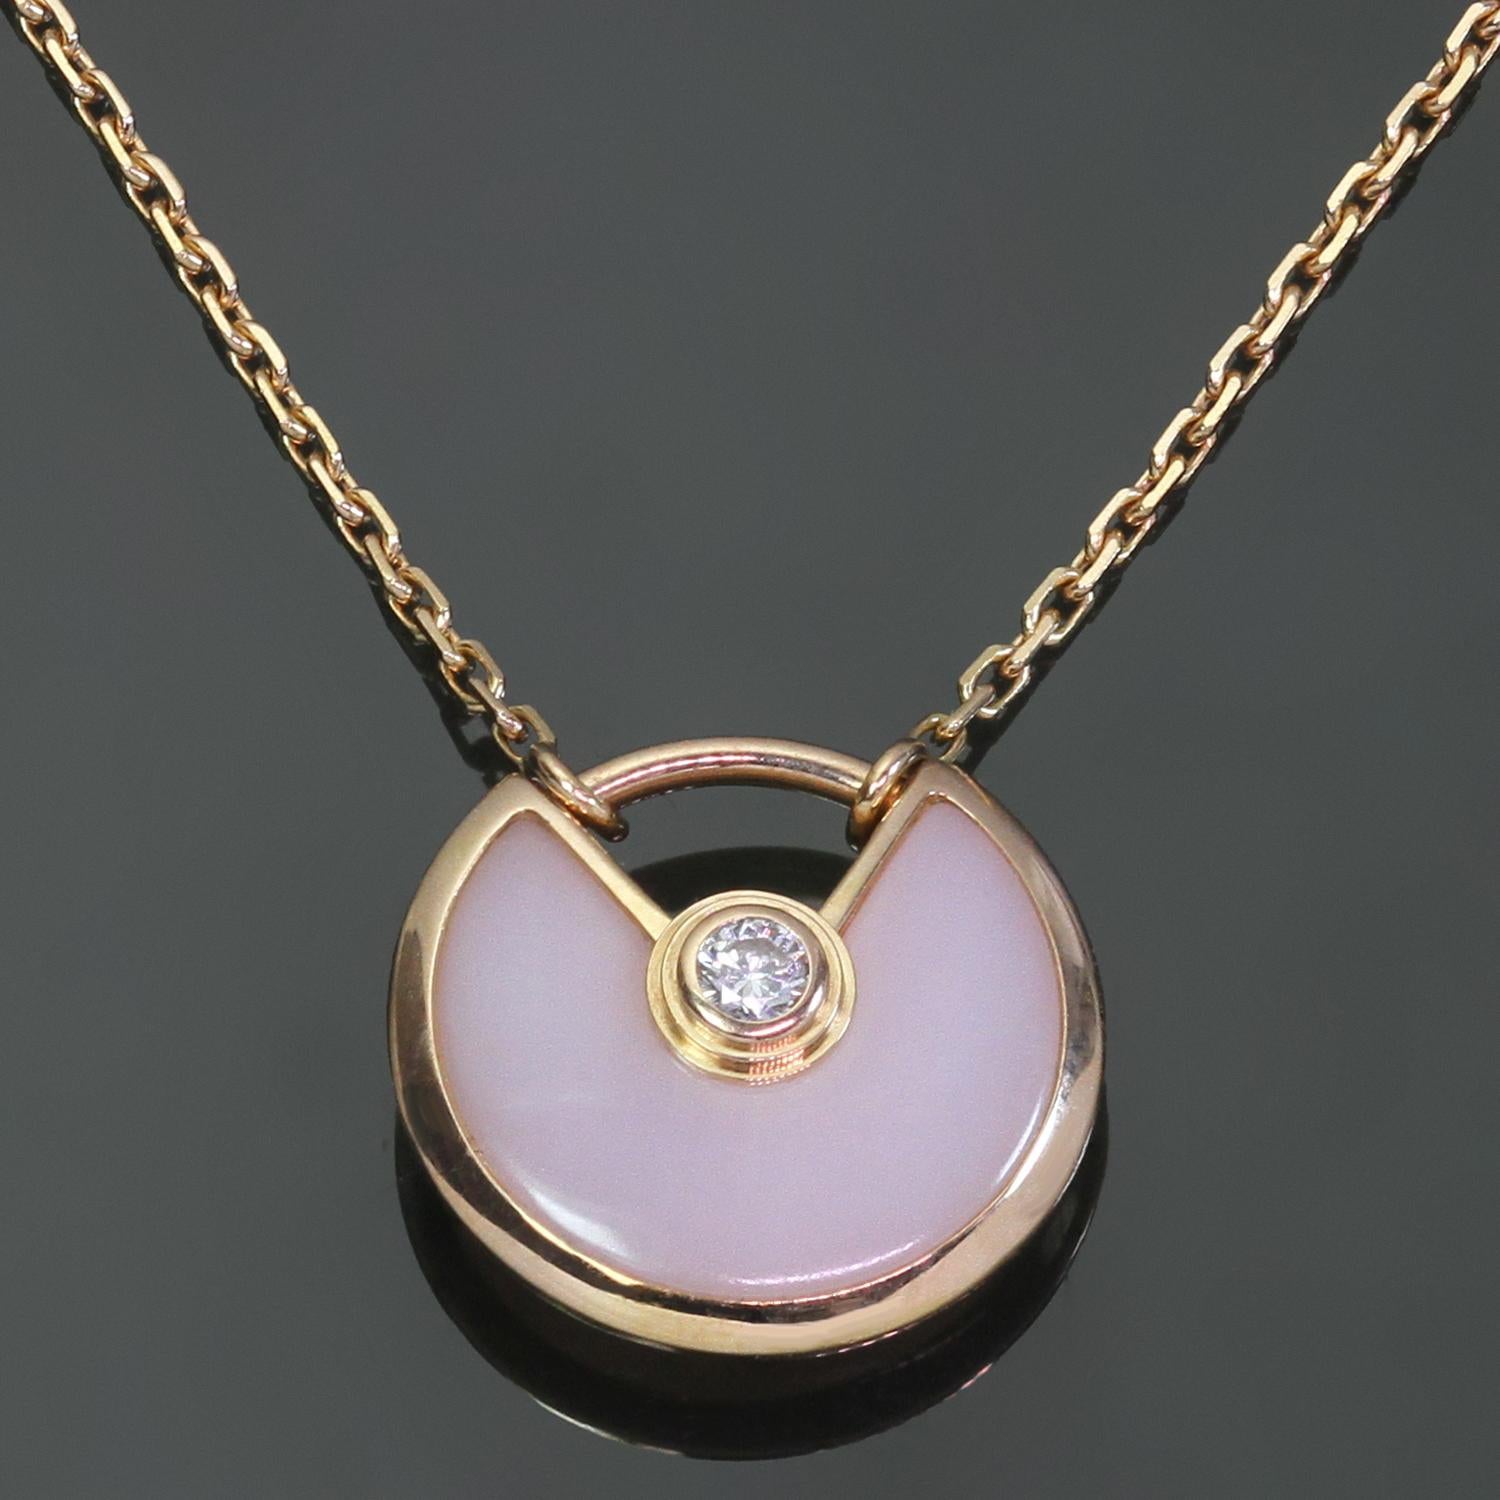 This gorgeous Cartier 18k rose gold necklace features a round amulette pendant set with pink opal and accented with a round brilliant-cut D-F VVS1-VVS2 diamond weighing an estimated 0.02 carats. Made in France circa 2010s. Measurements: 0.47